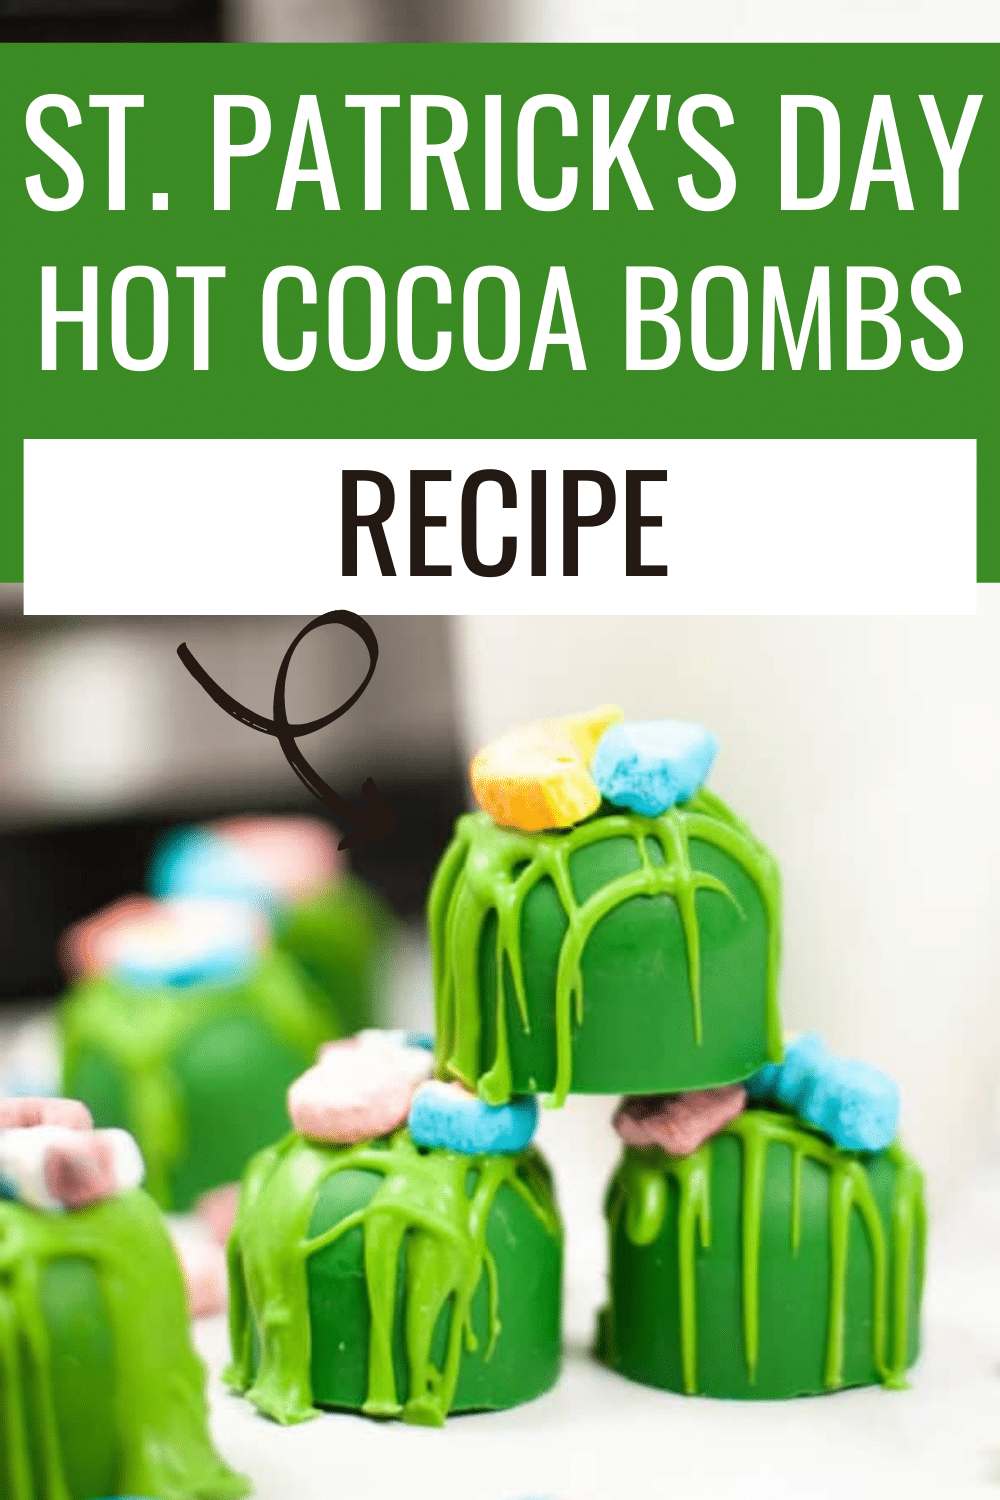 These Instant Pot St. Patrick’s Day Hot Cocoa Bombs are about to make you forget about "luck" and turn your dreams into a reality! #stpatricksday #hotcocoabombs #hotcocoa #hotchocolate via @wondermomwannab